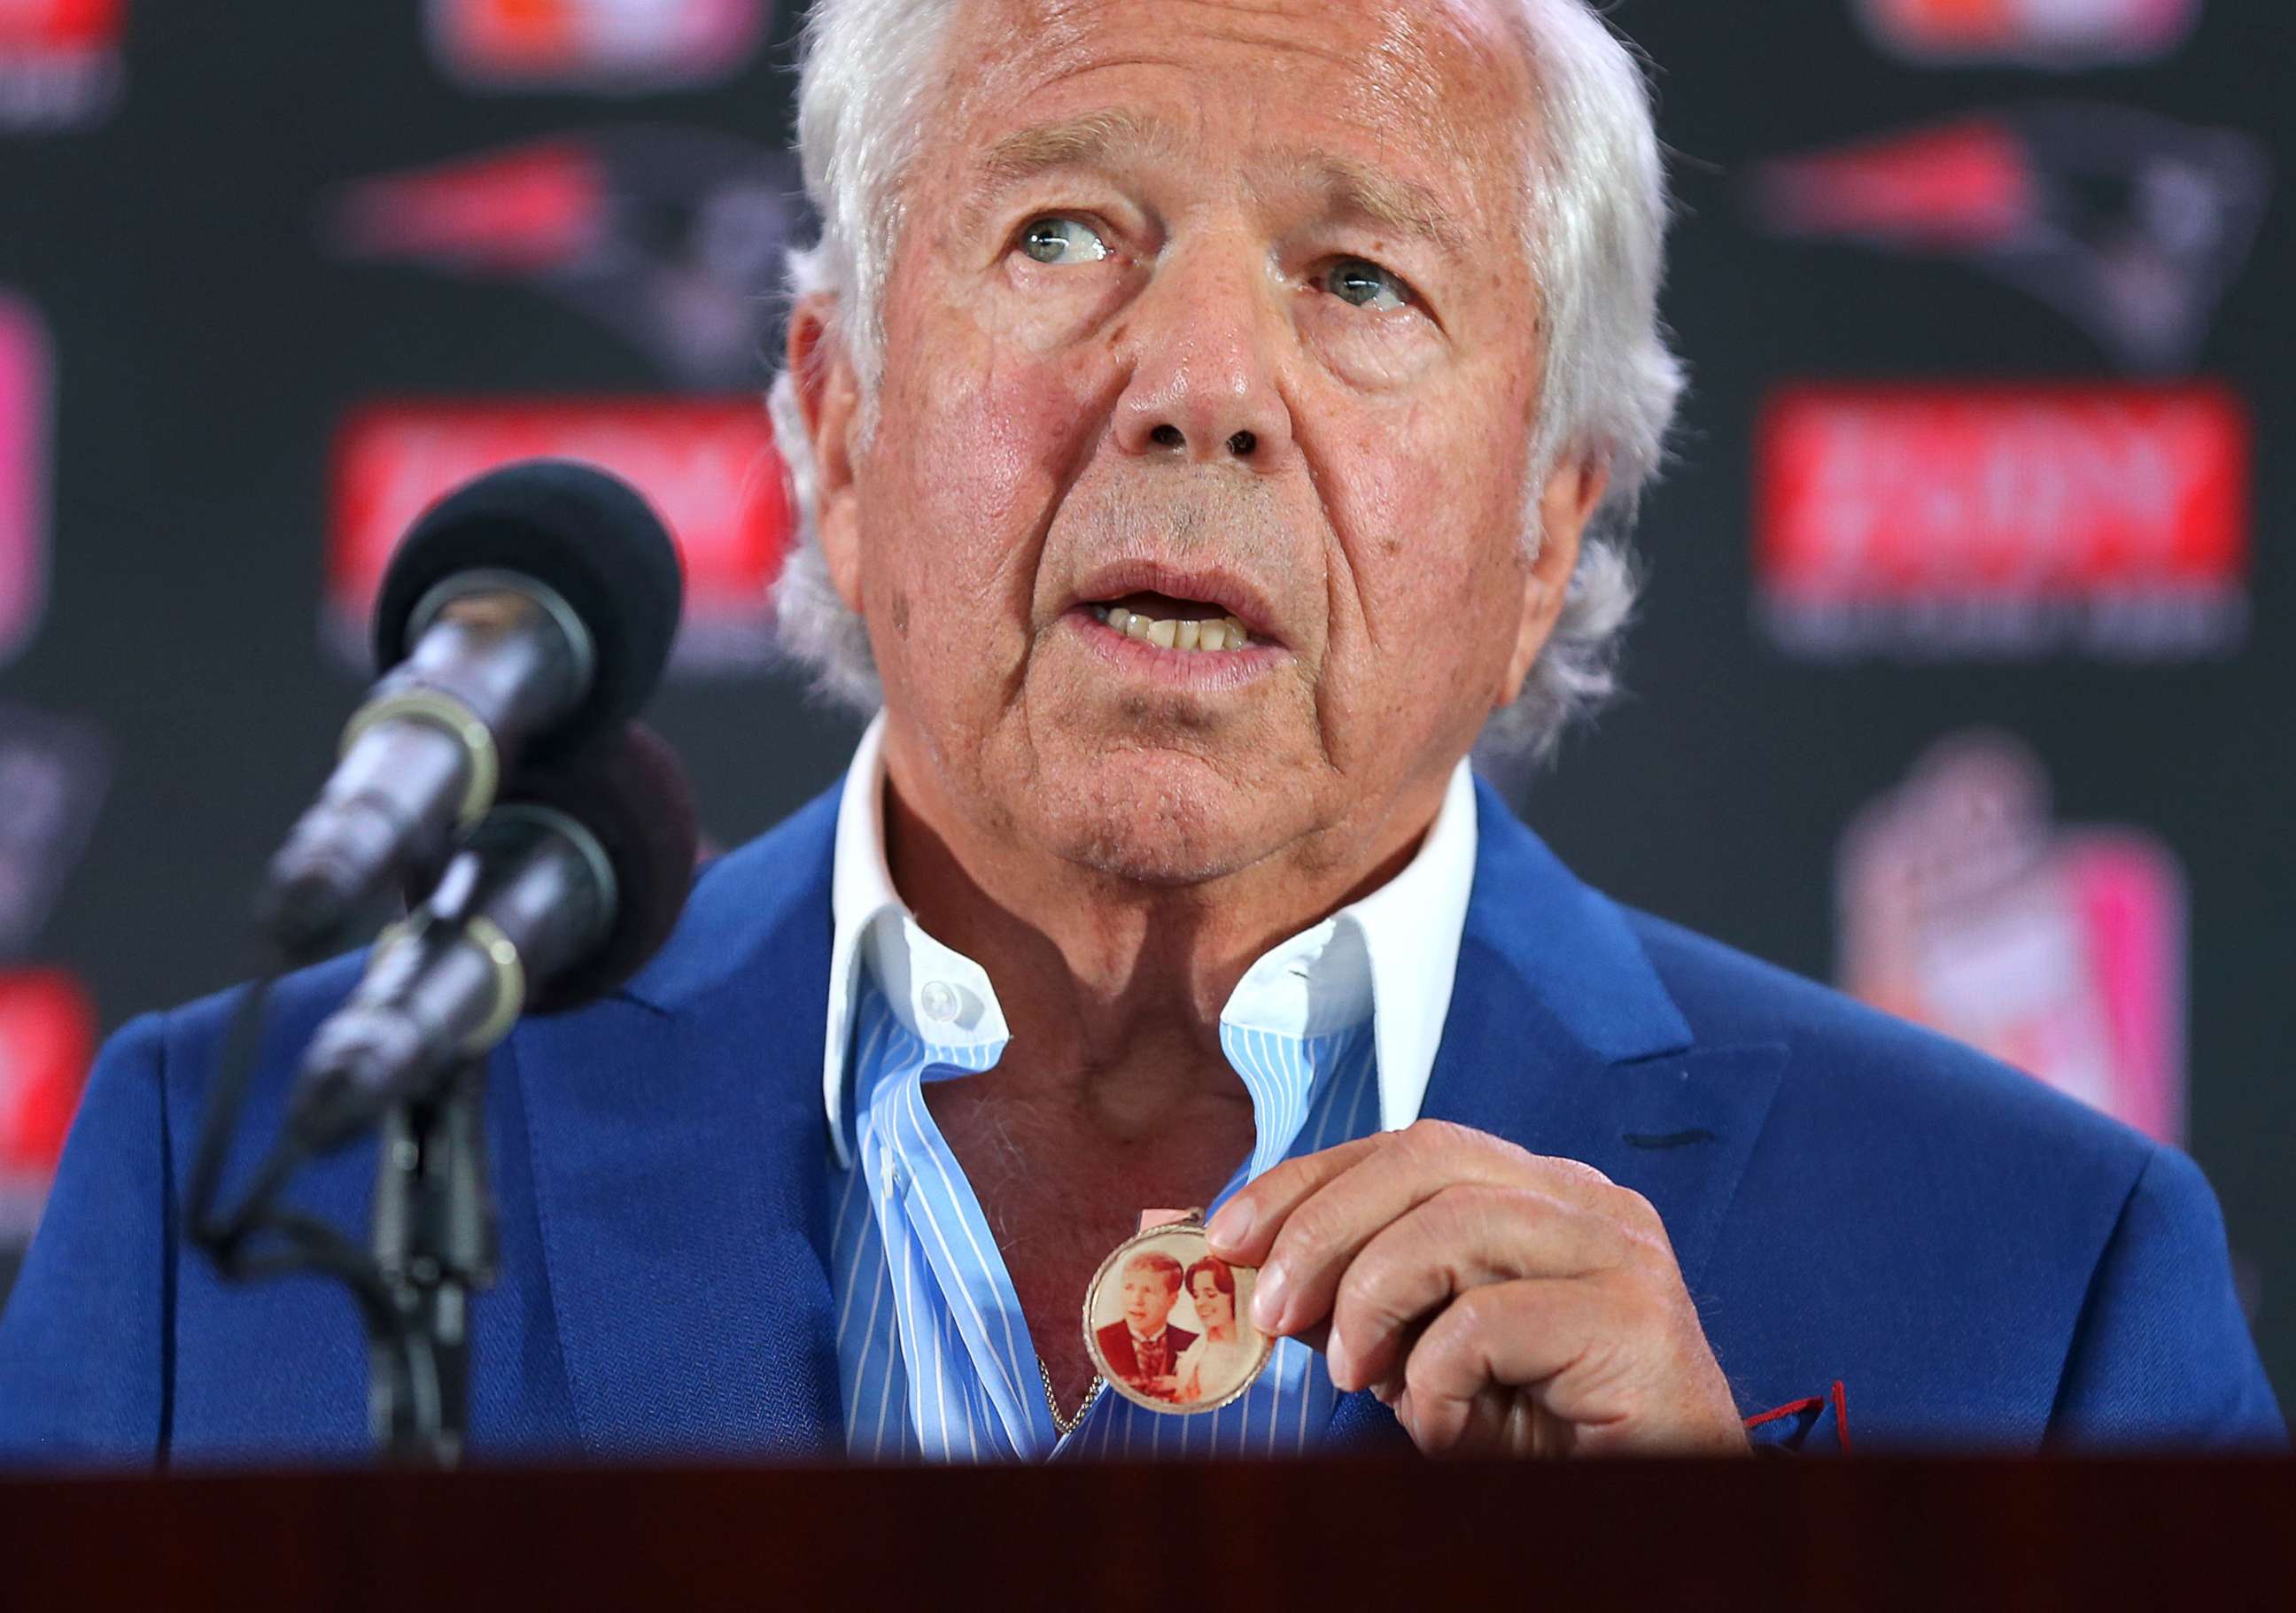 PHOTO: New England Patriots owner Robert Kraft holds a medal containing a wedding photo of him and his late wife Myra at a press conference in Foxborough, Mass., Aug. 9, 2017. Kraft said he wore if for 11 months straight after she died.